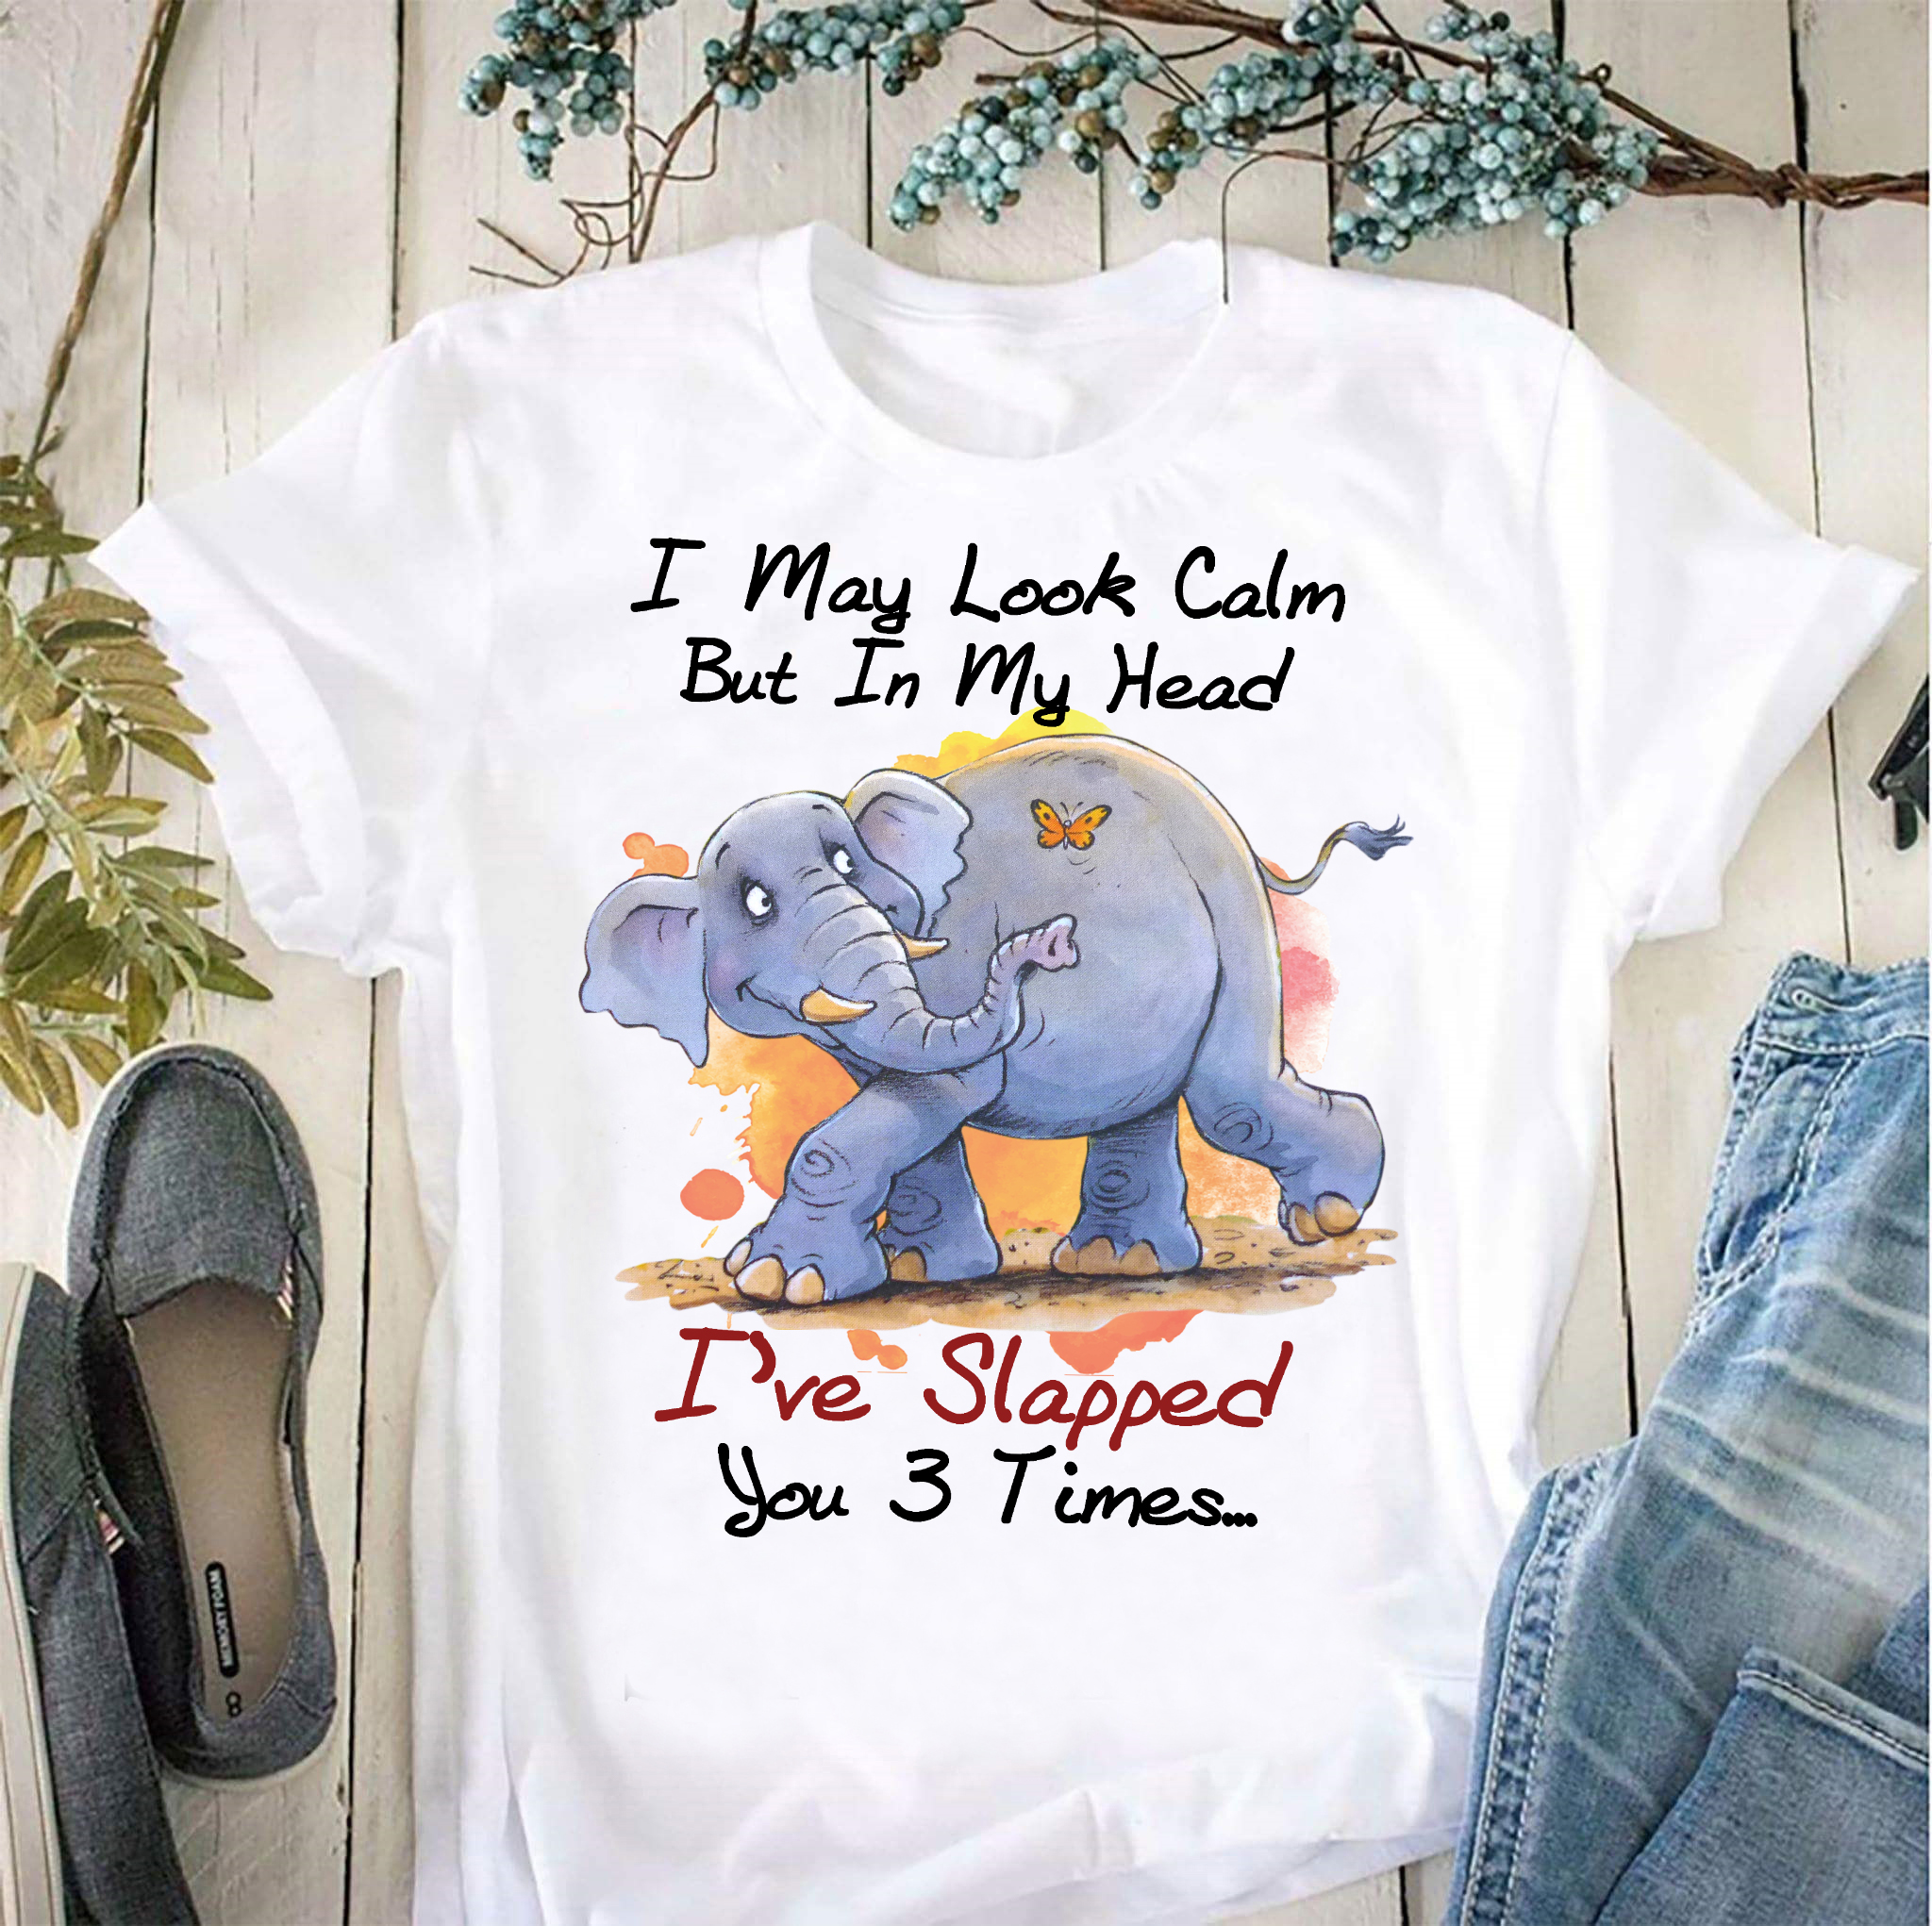 I may look calm but in my head I've slapped you 3 times - Grumpy elephant